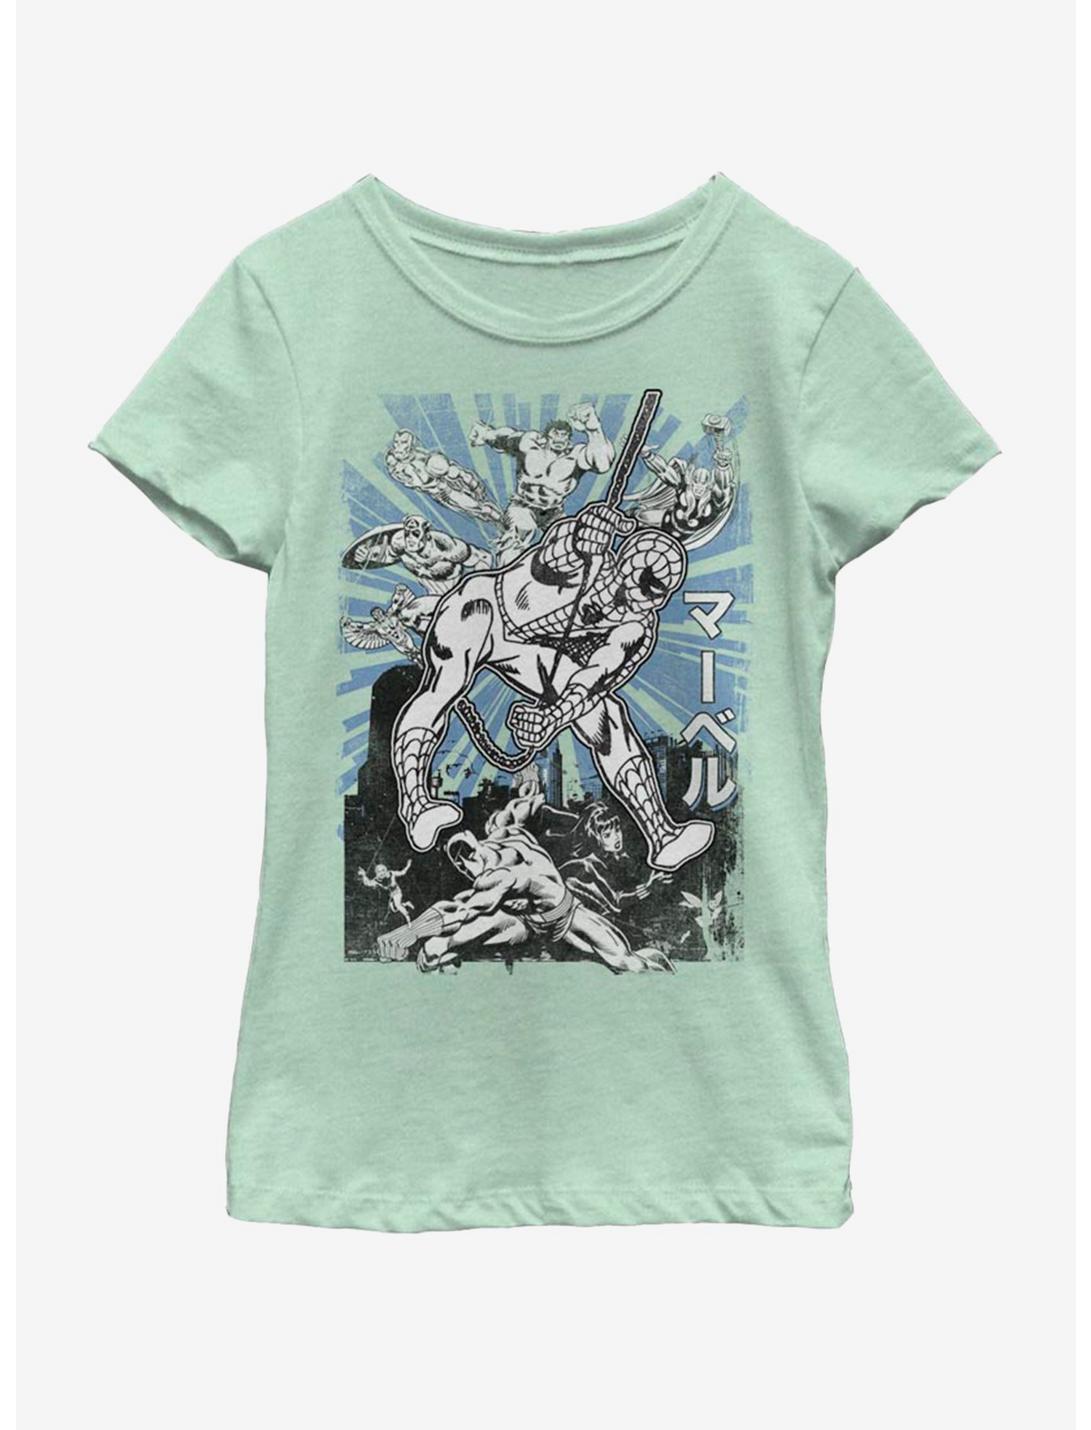 Marvel The Avengers Fight Youth Girls T-Shirt, MINT, hi-res